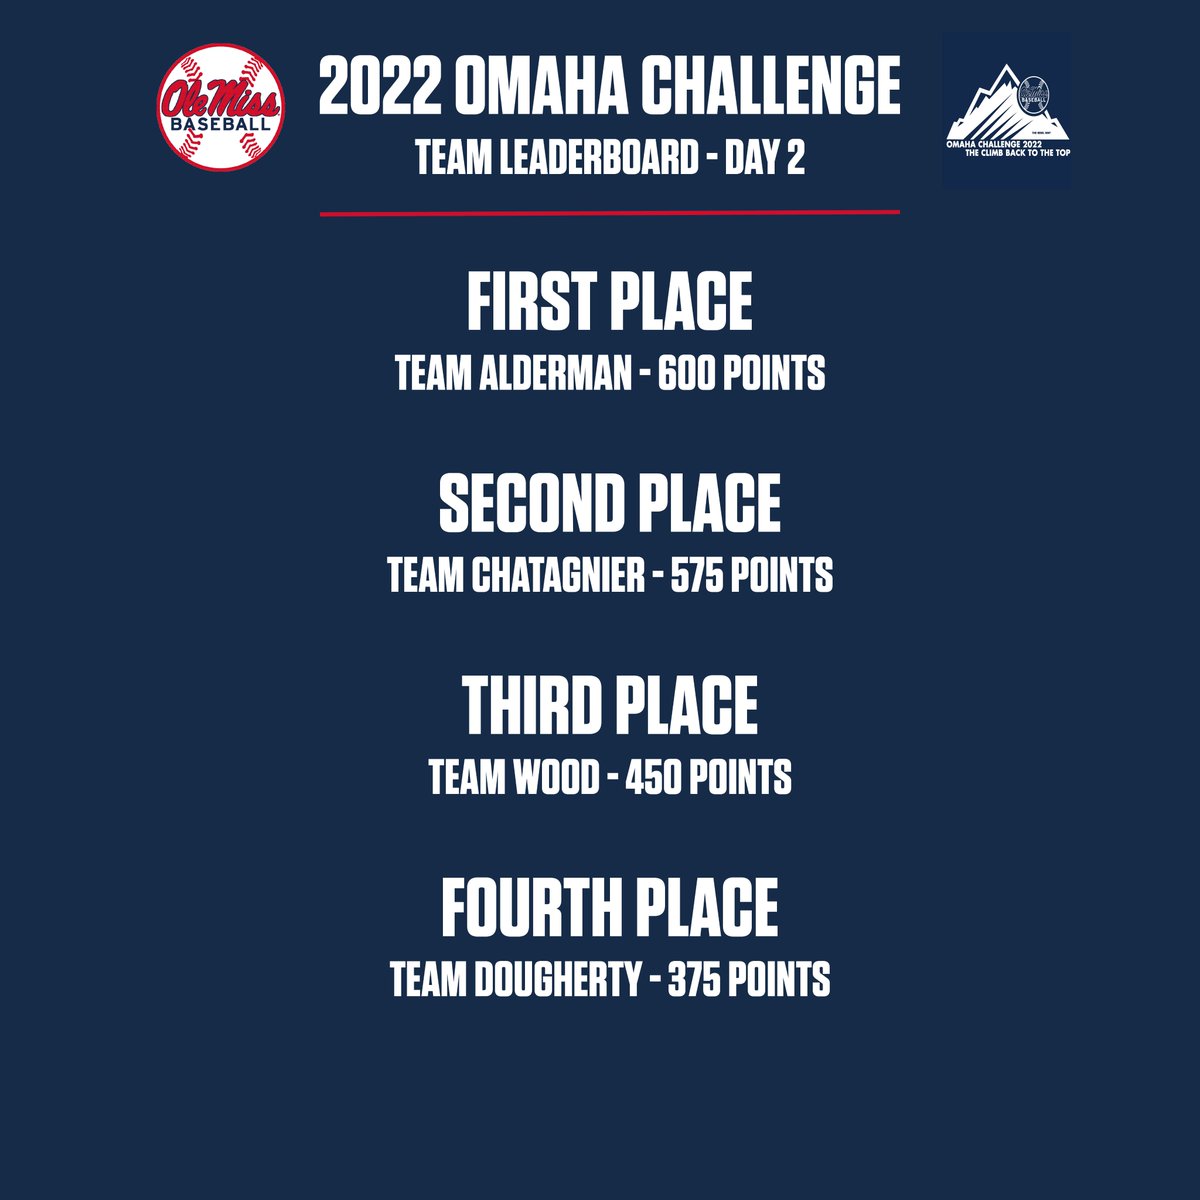 Team Alderman and their leader on top after two days of the Omaha Challenge!